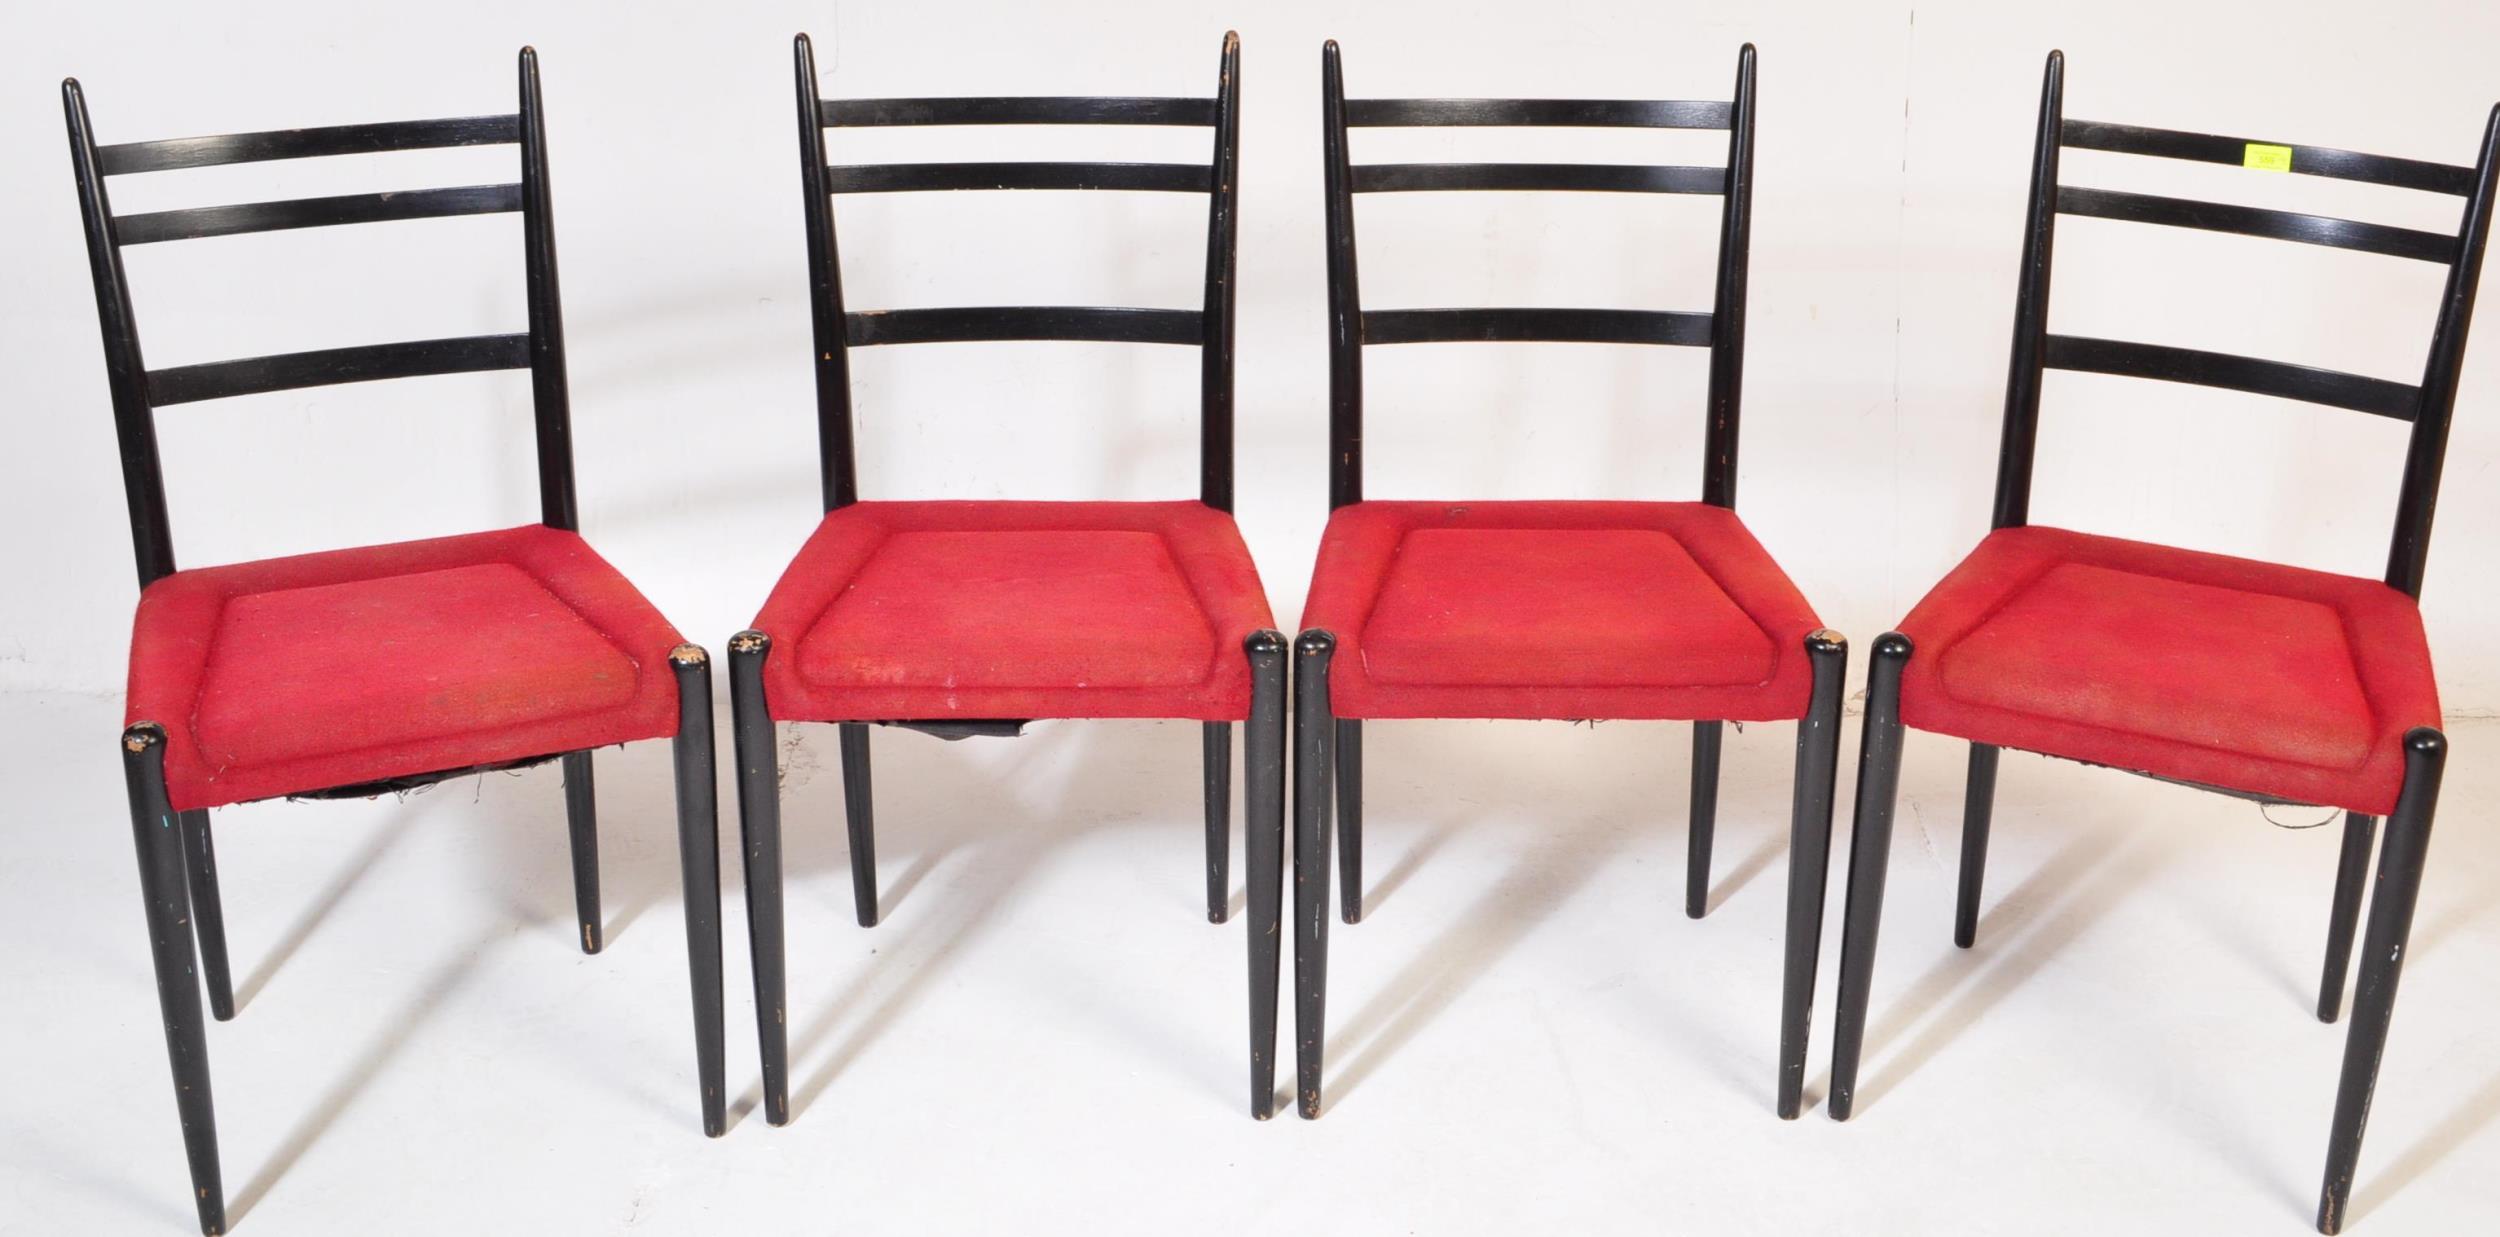 FOUR RETRO MID 20TH CENTURY EBONISED DINING CHAIRS - Image 2 of 5